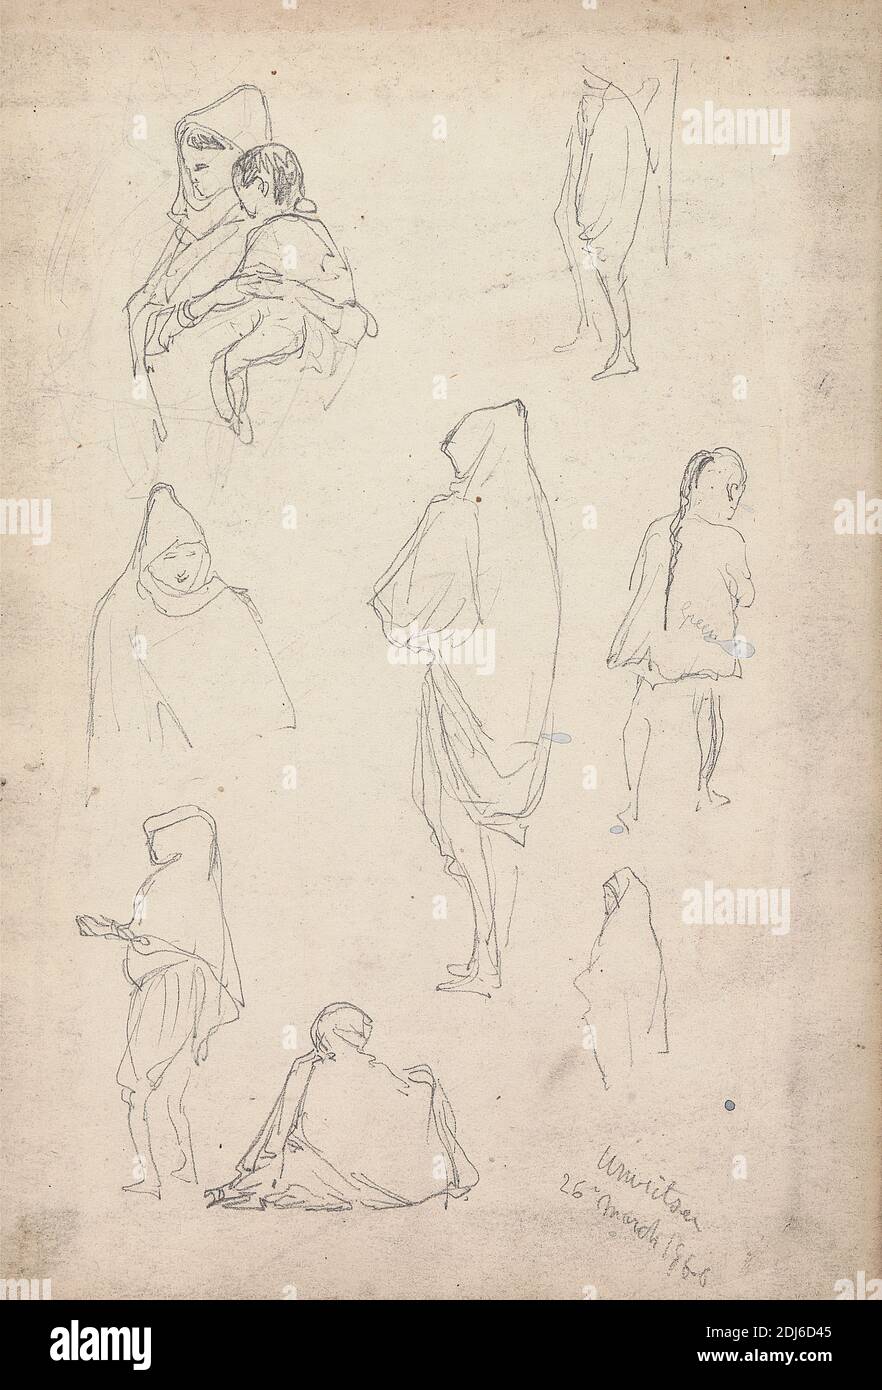 Studies of Women and Children, Amritsar, 26 March 1860, William Simpson, 1823–1899, British, 1860, Graphite on medium, smooth, cream wove paper, Sheet: 4 × 5 7/8 inches (10.2 × 14.9 cm) and Binding: 4 1/4 inches (10.8 cm), animal art, camel (mammal), carriage, figure study, genre subject, horse (animal), Amritsar, India Stock Photo